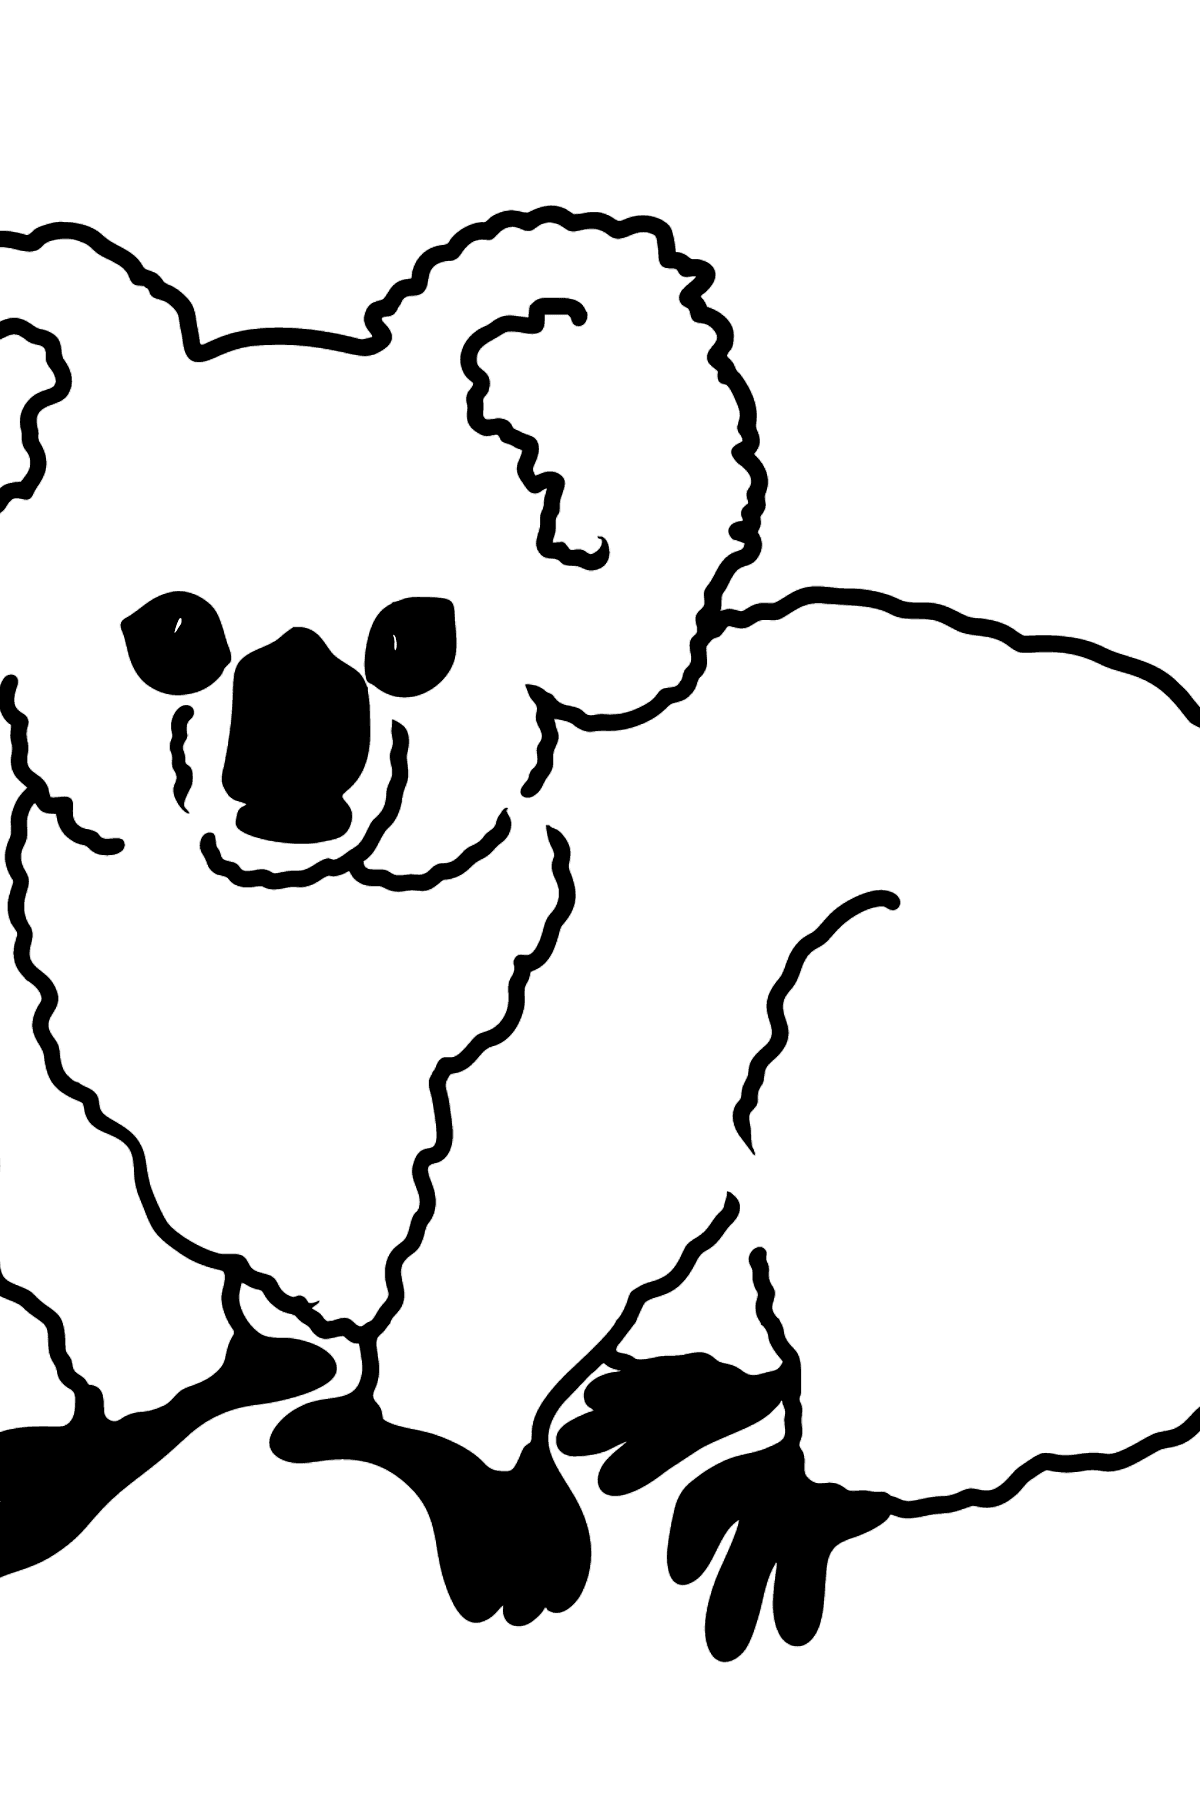 Koala coloring page - Coloring Pages for Kids